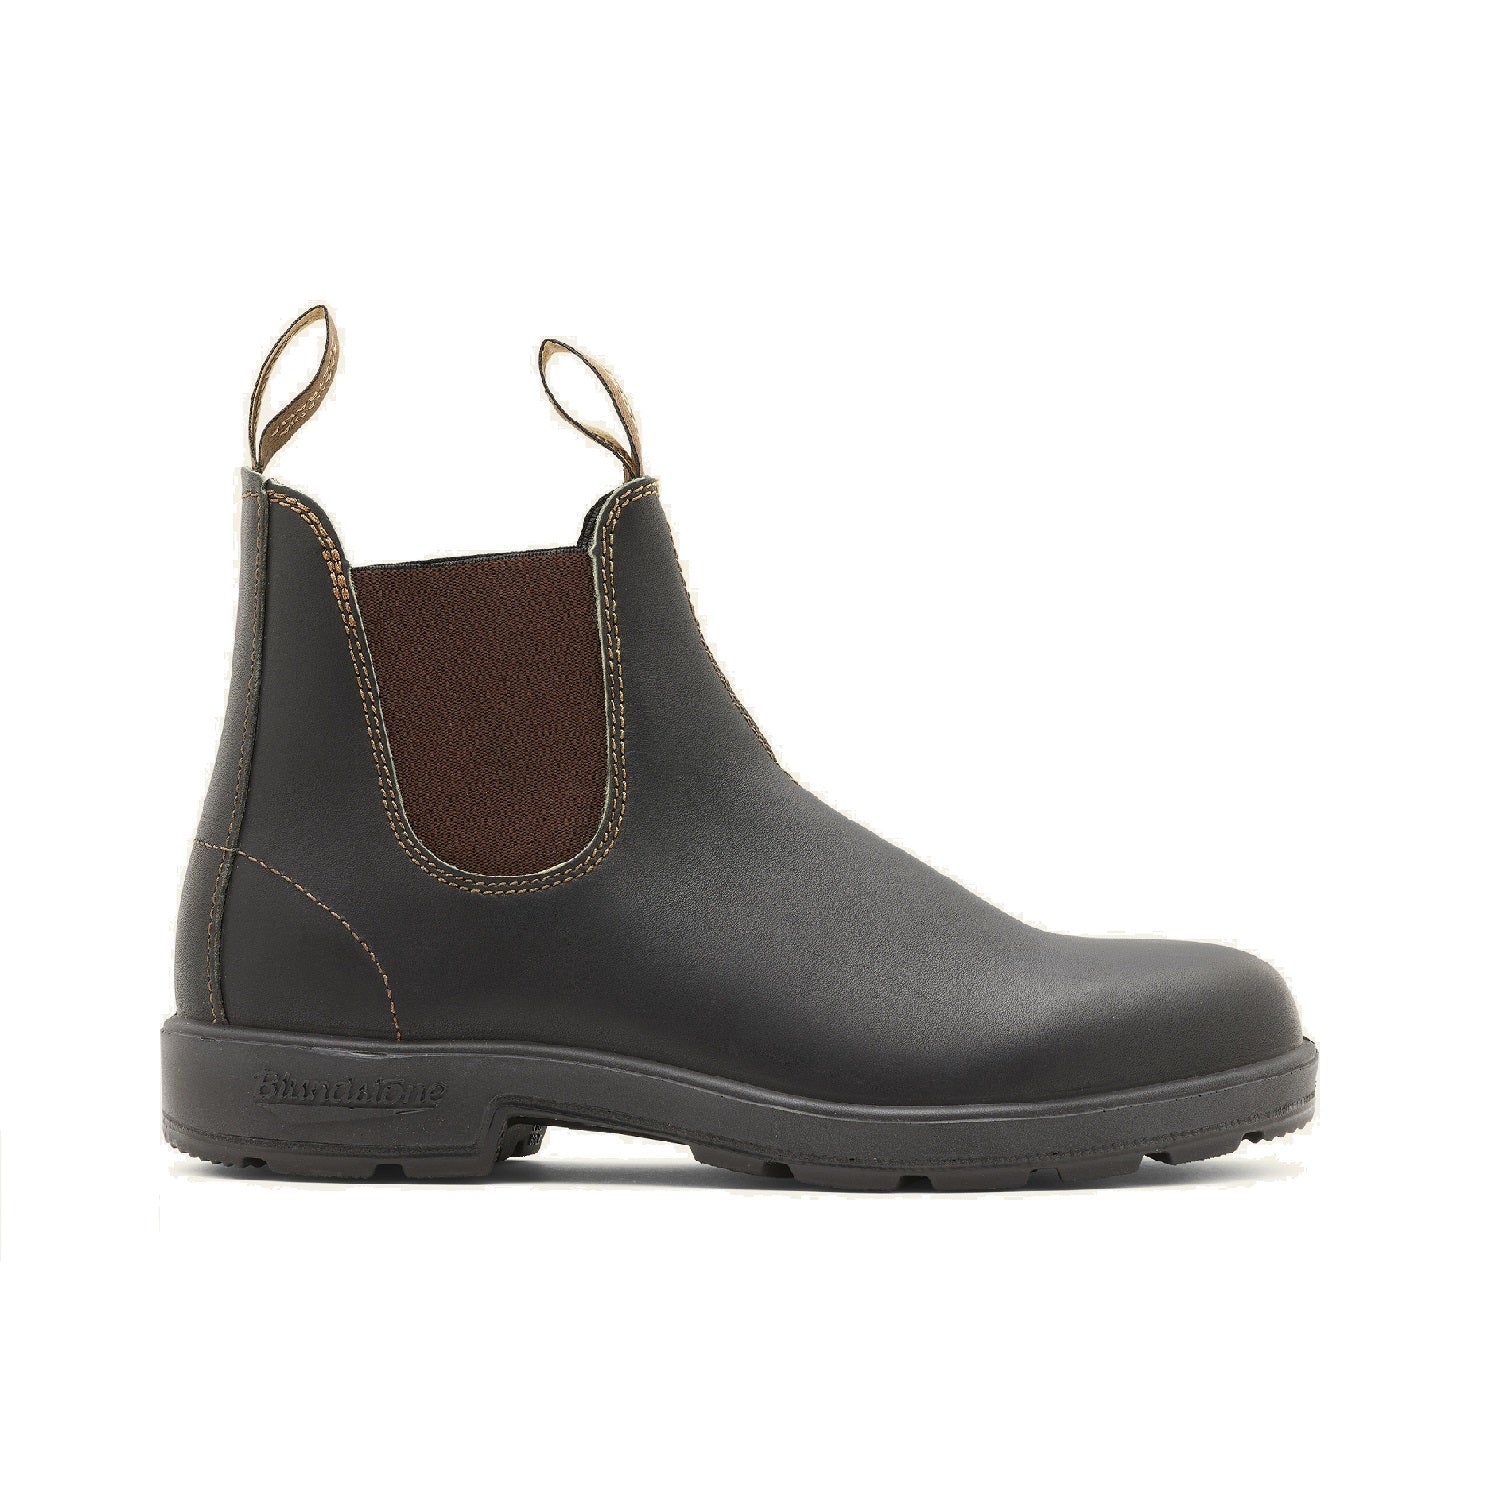 Stout brown leather chelsea boot.